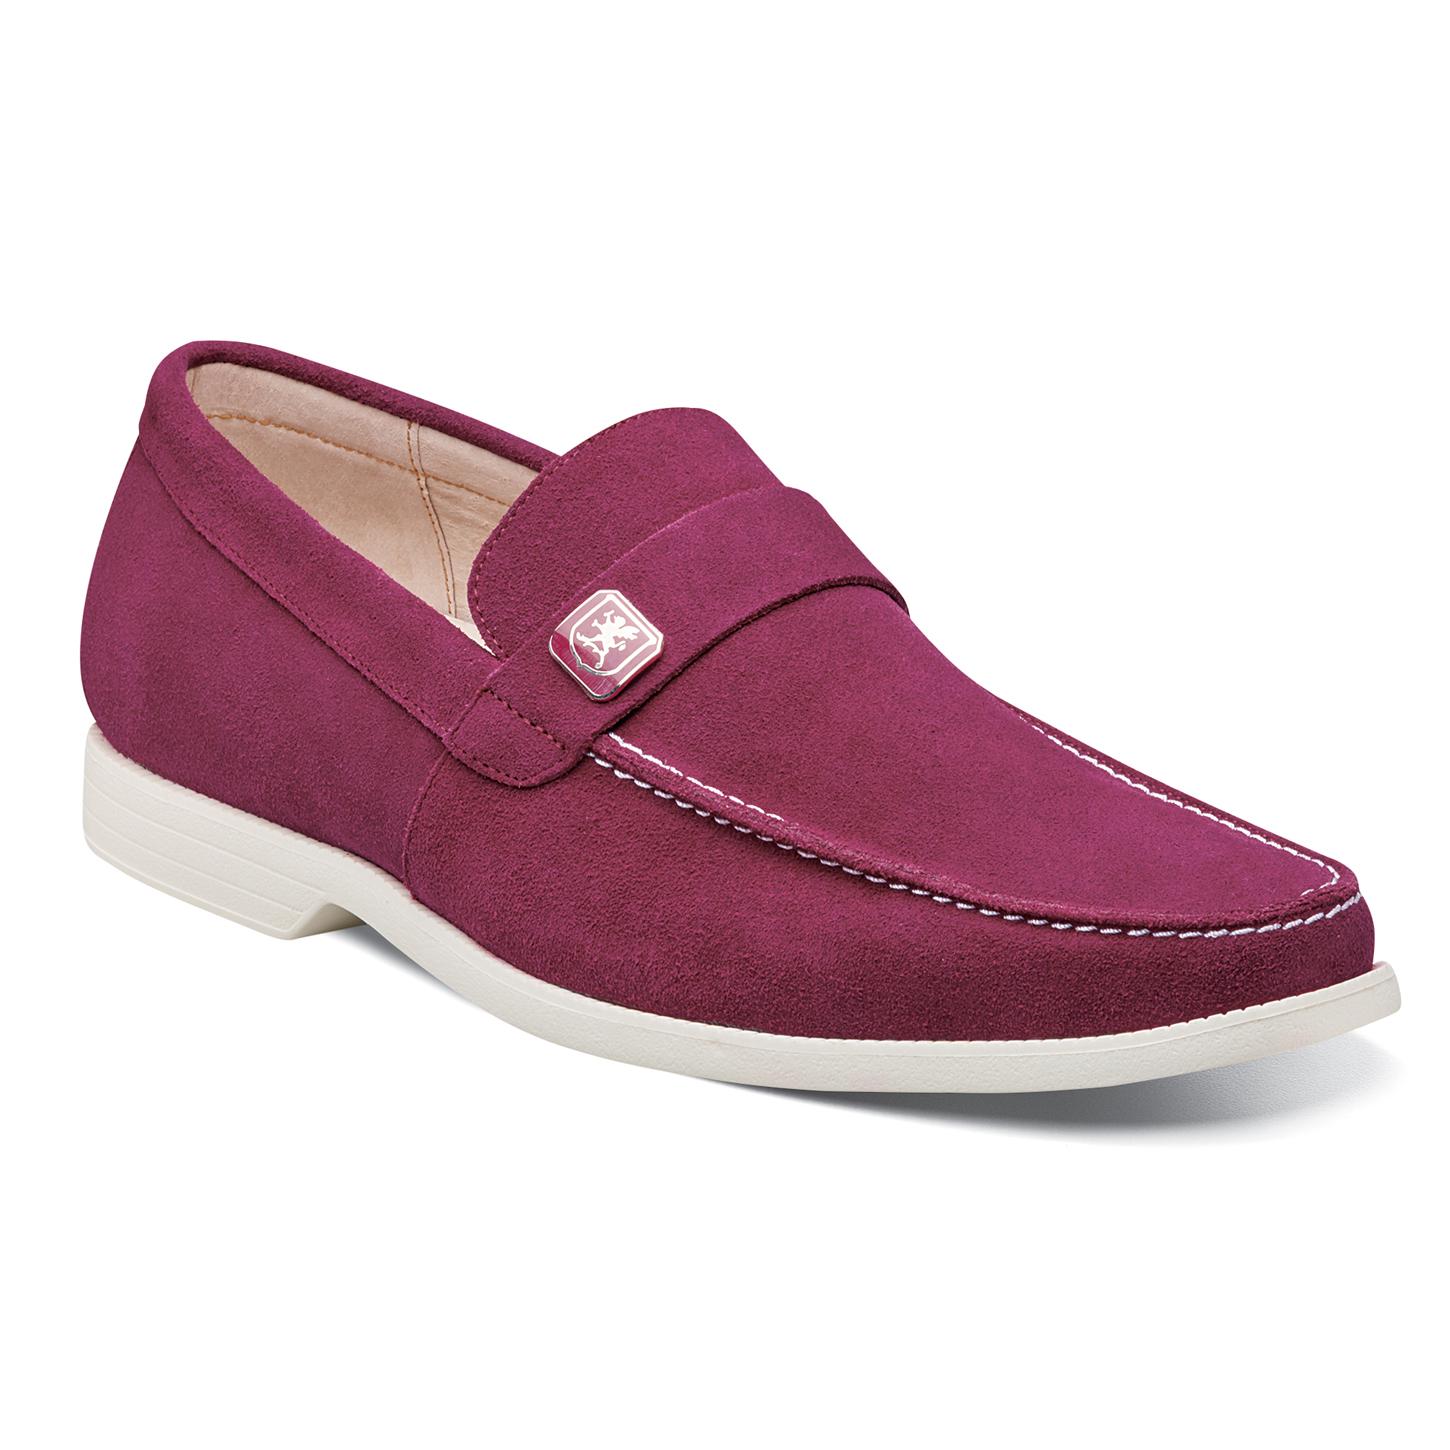 berry suede shoes